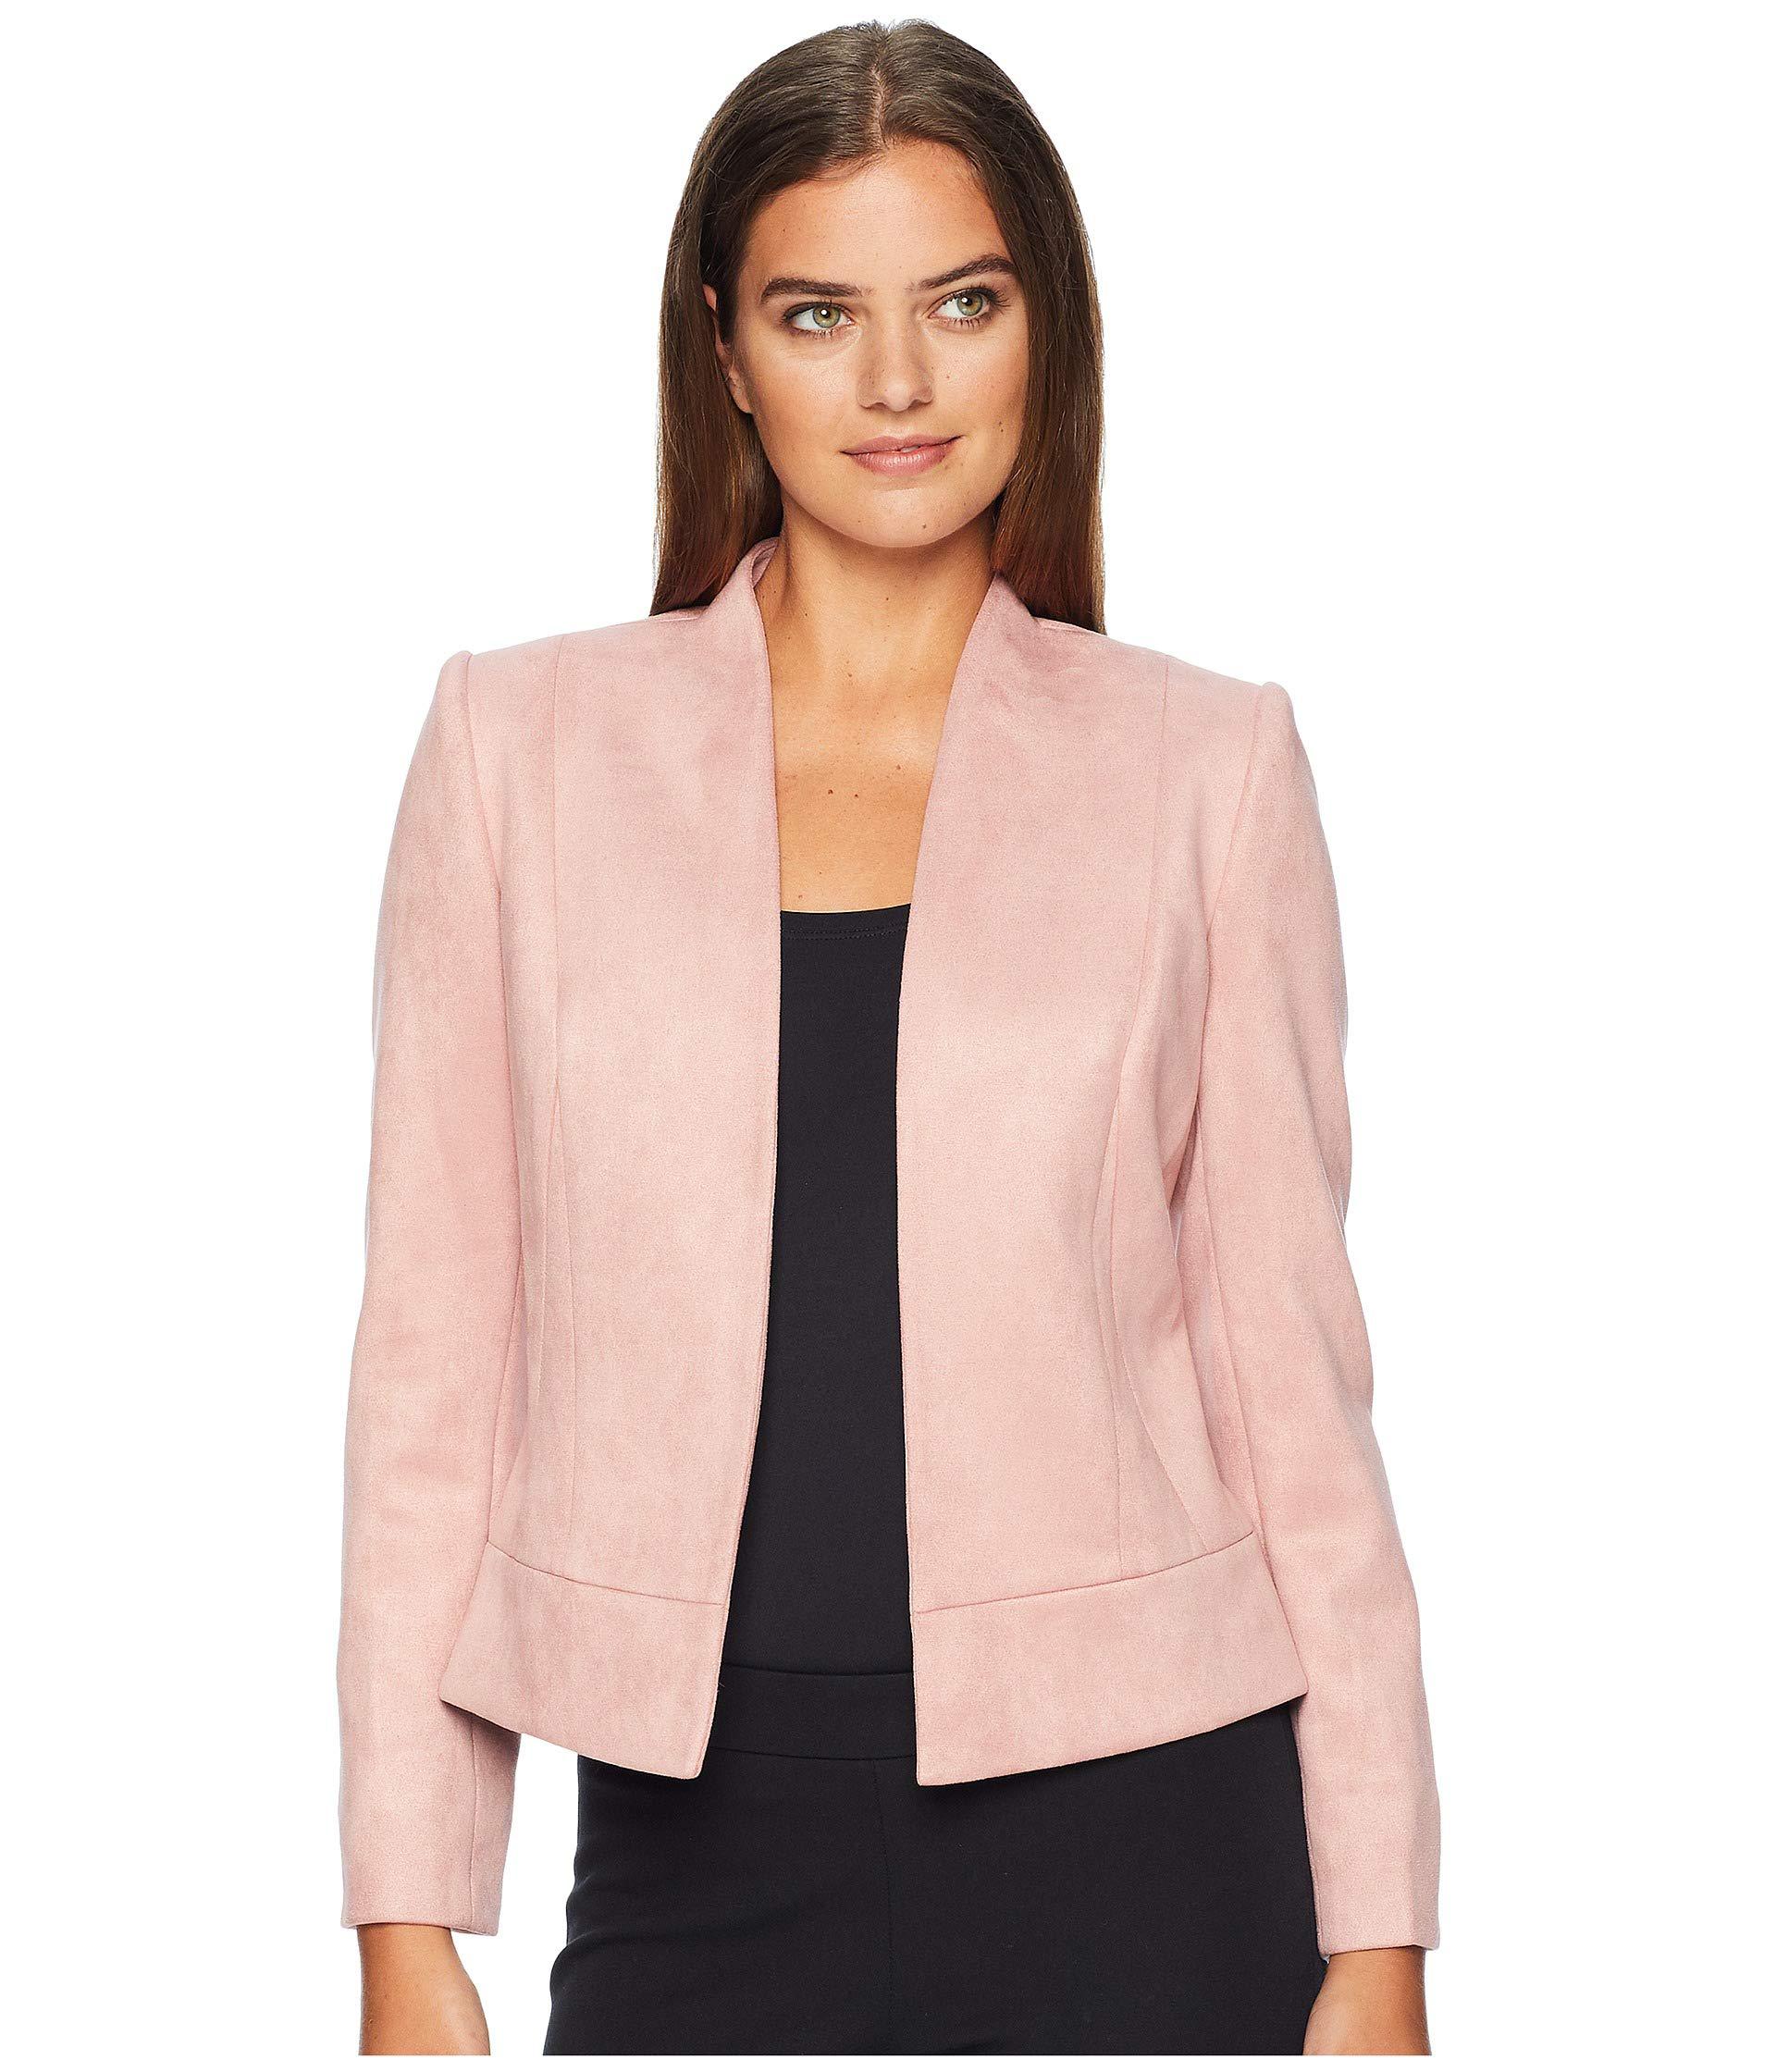 Tahari Faux Suede Jacket With Seam Detail in Pink - Lyst